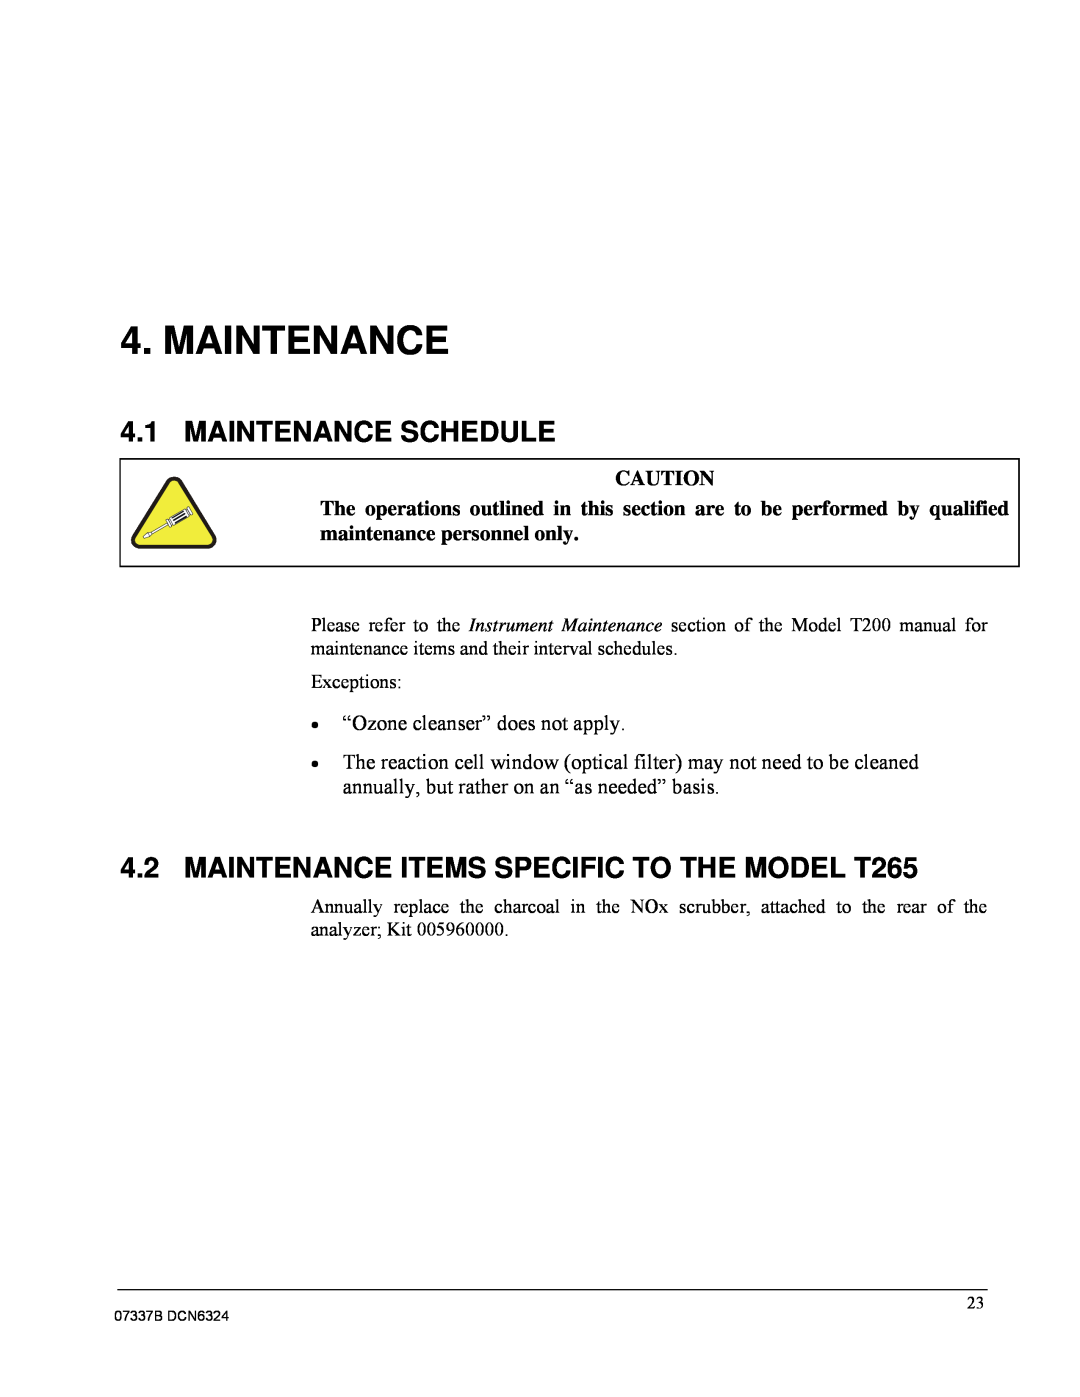 Teledyne manual Maintenance Schedule, 4.2MAINTENANCE ITEMS SPECIFIC TO THE MODEL T265 